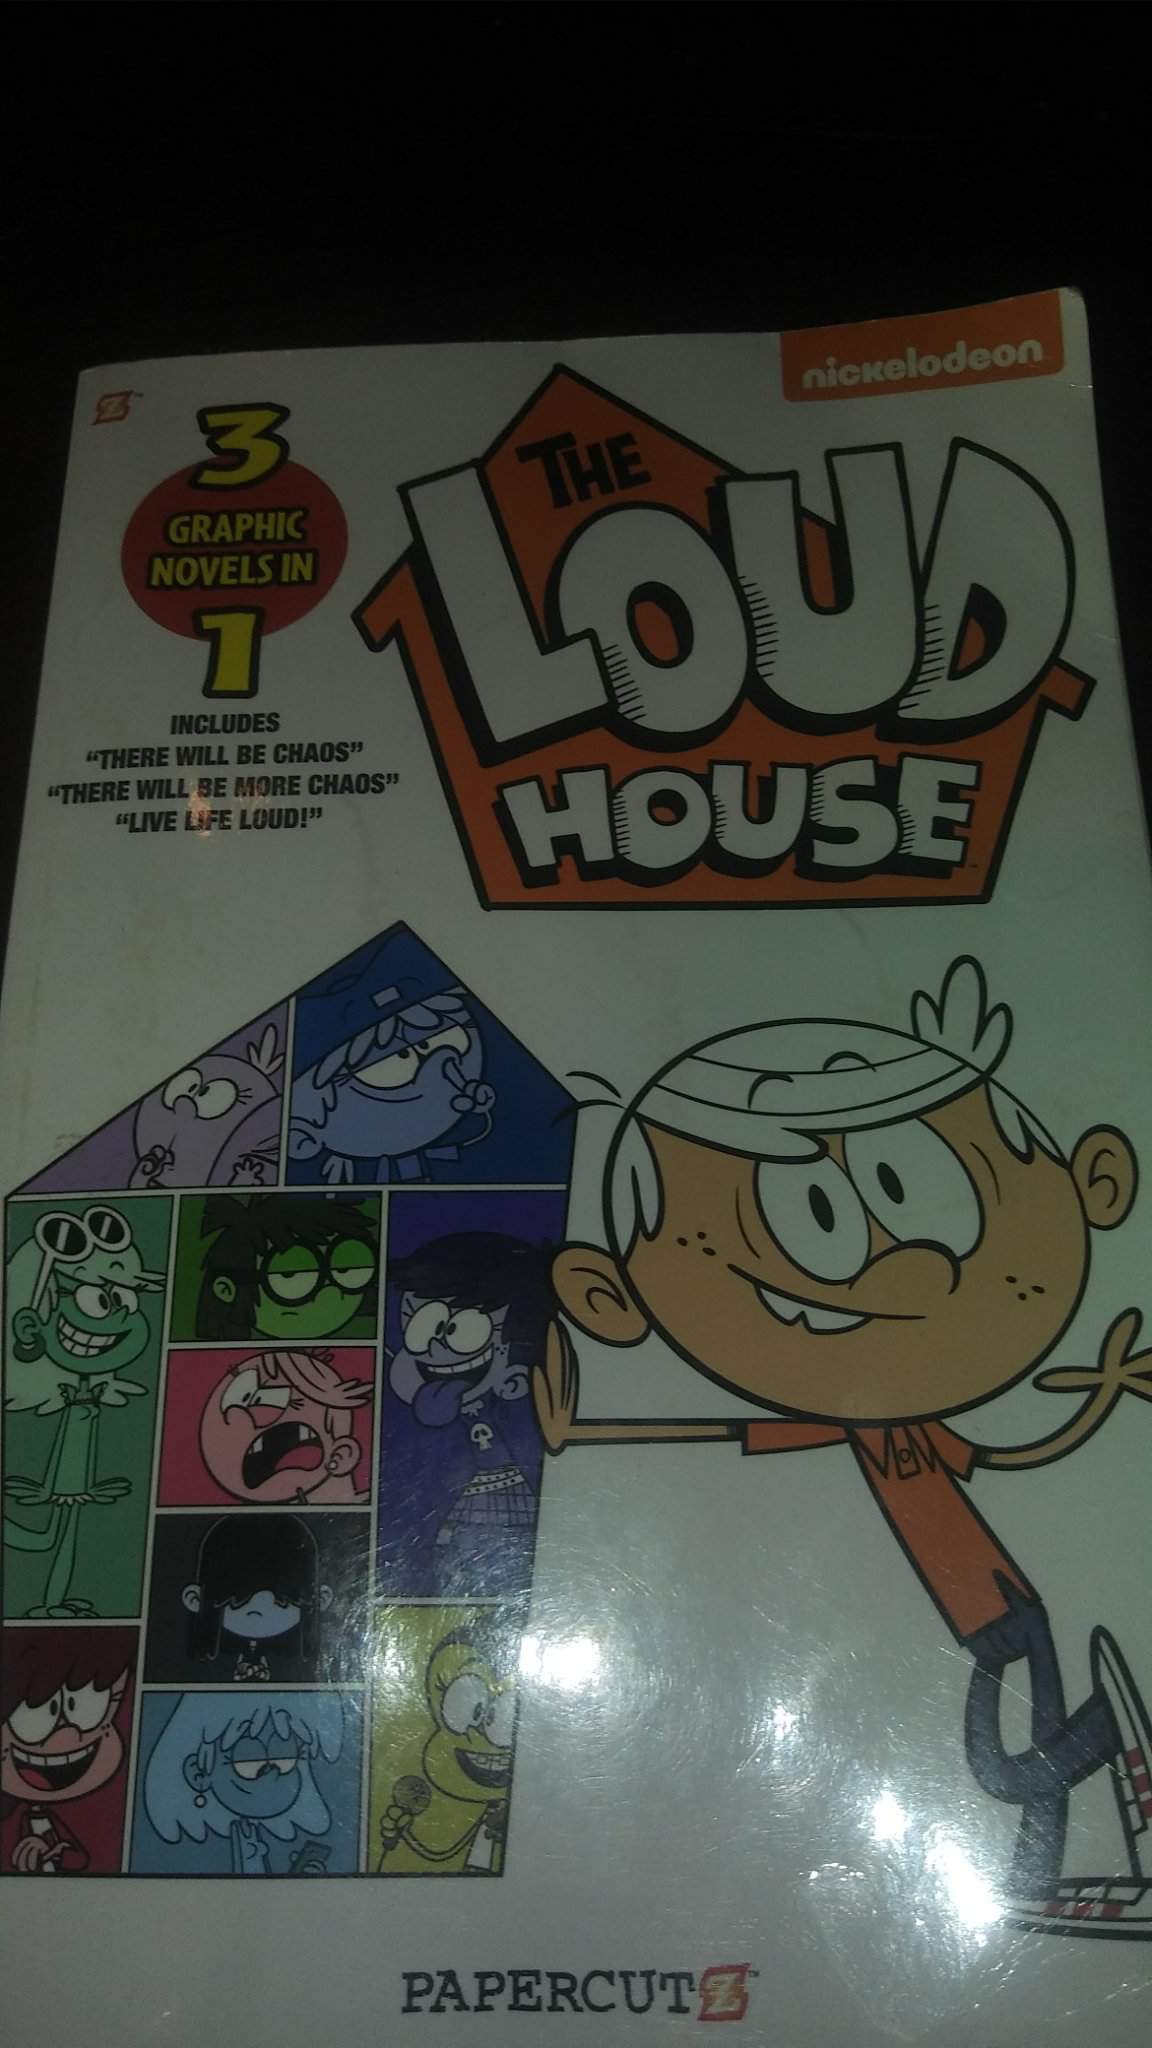 Nickelodeons The Loud House 3 Graphic Novels In 1 Wiki The Loud House Amino Amino 